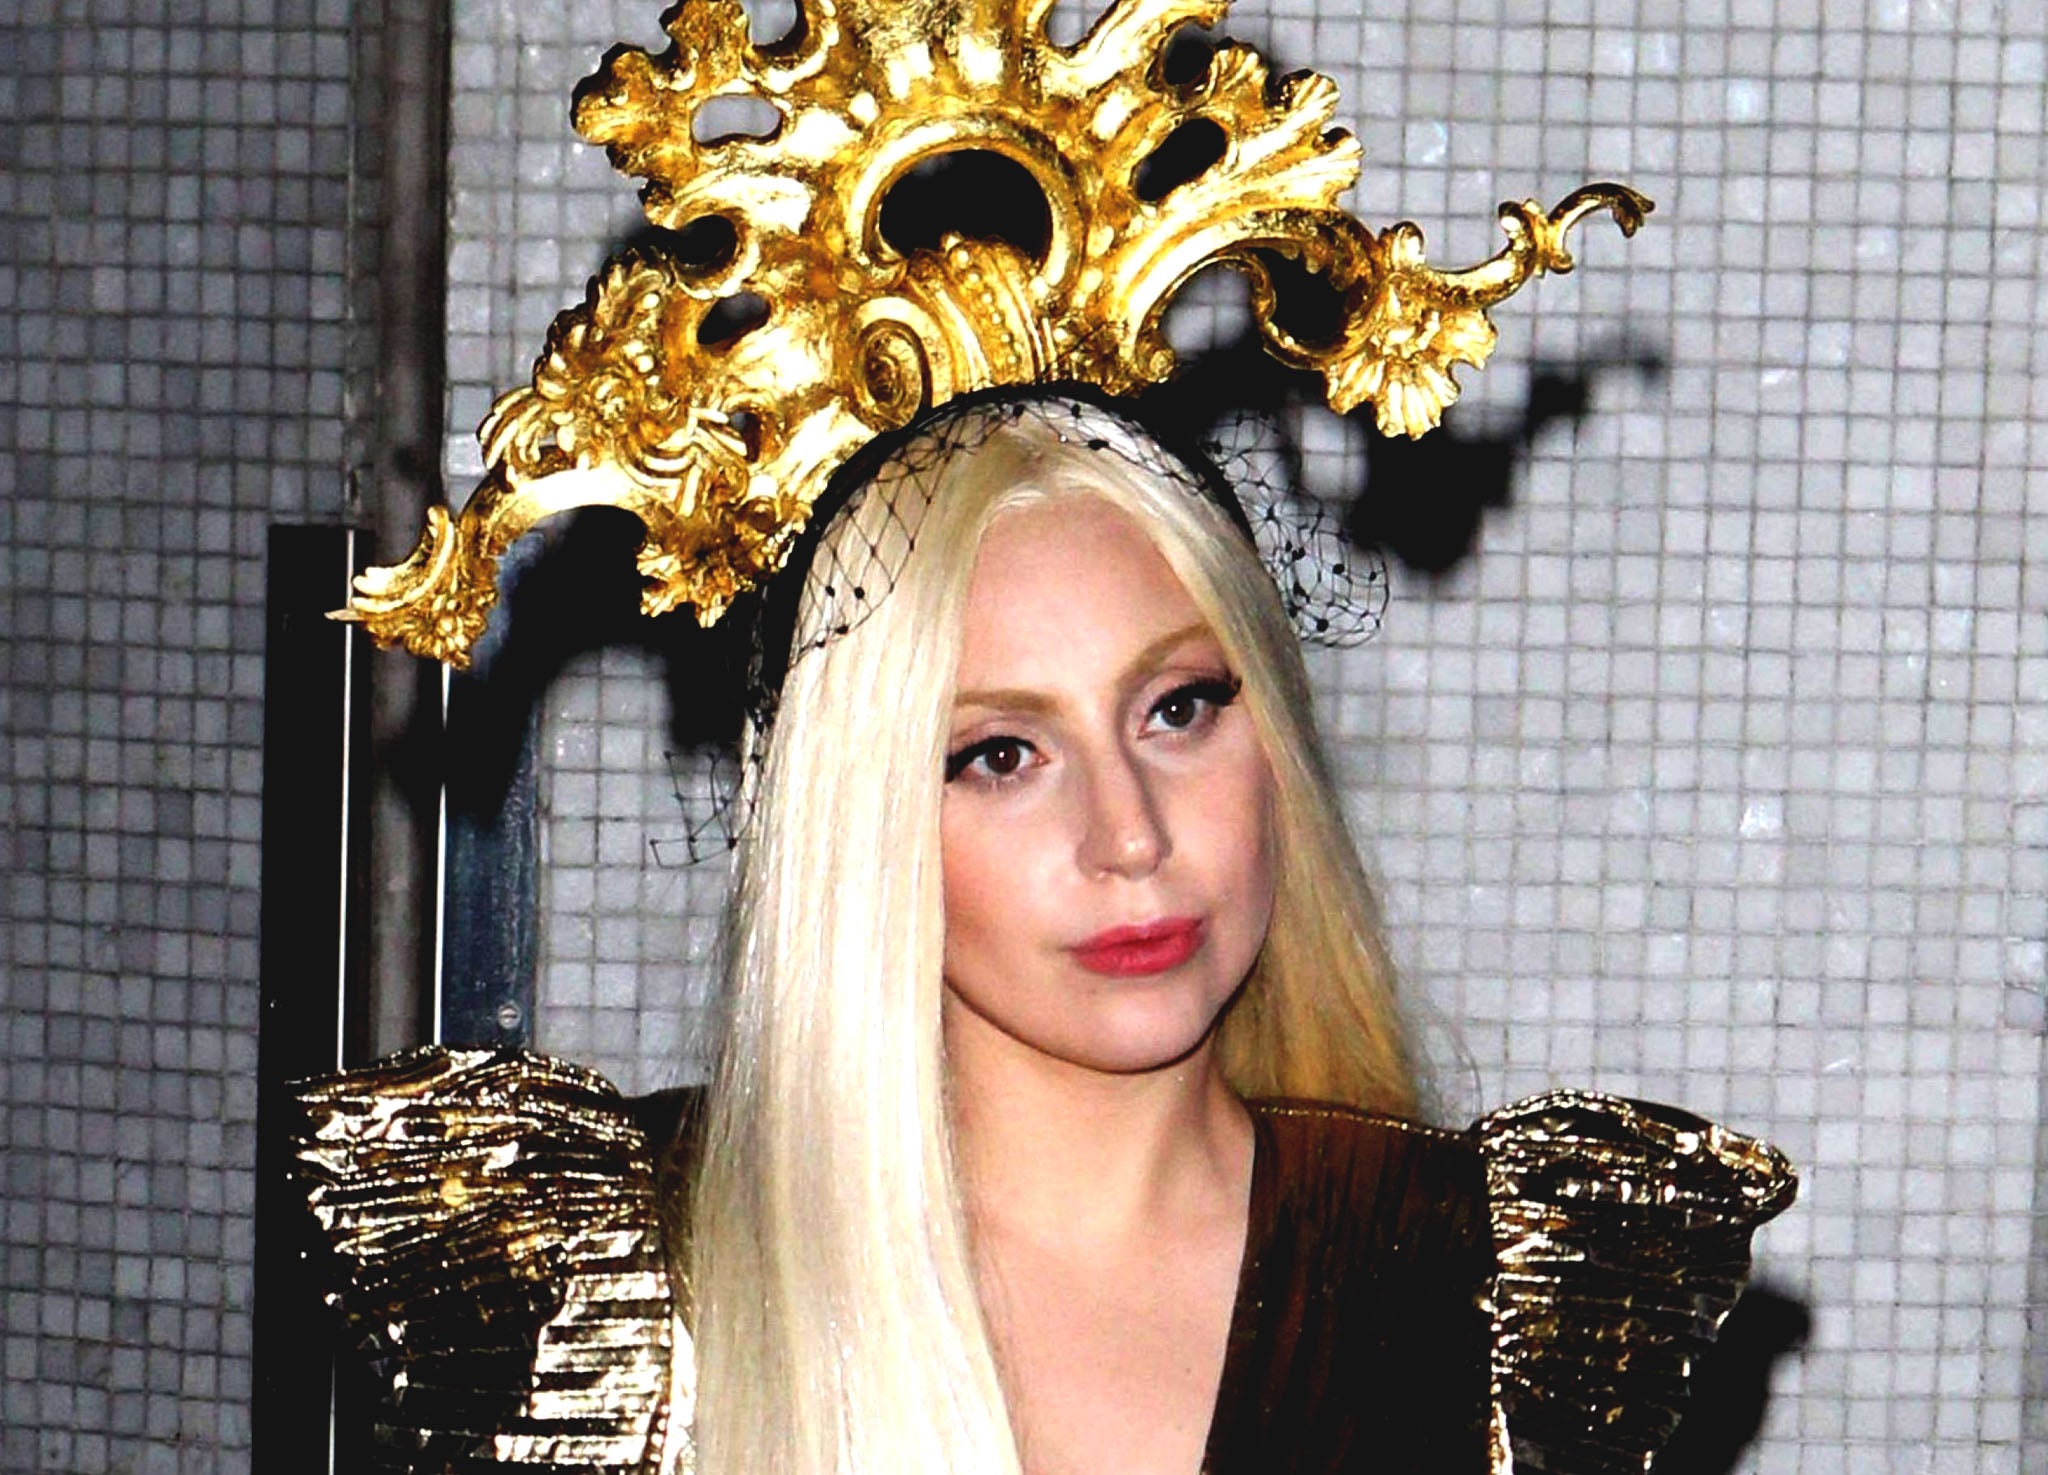 Polk Her Face: Lady Gaga has been named one of the hardest lyricists to understand